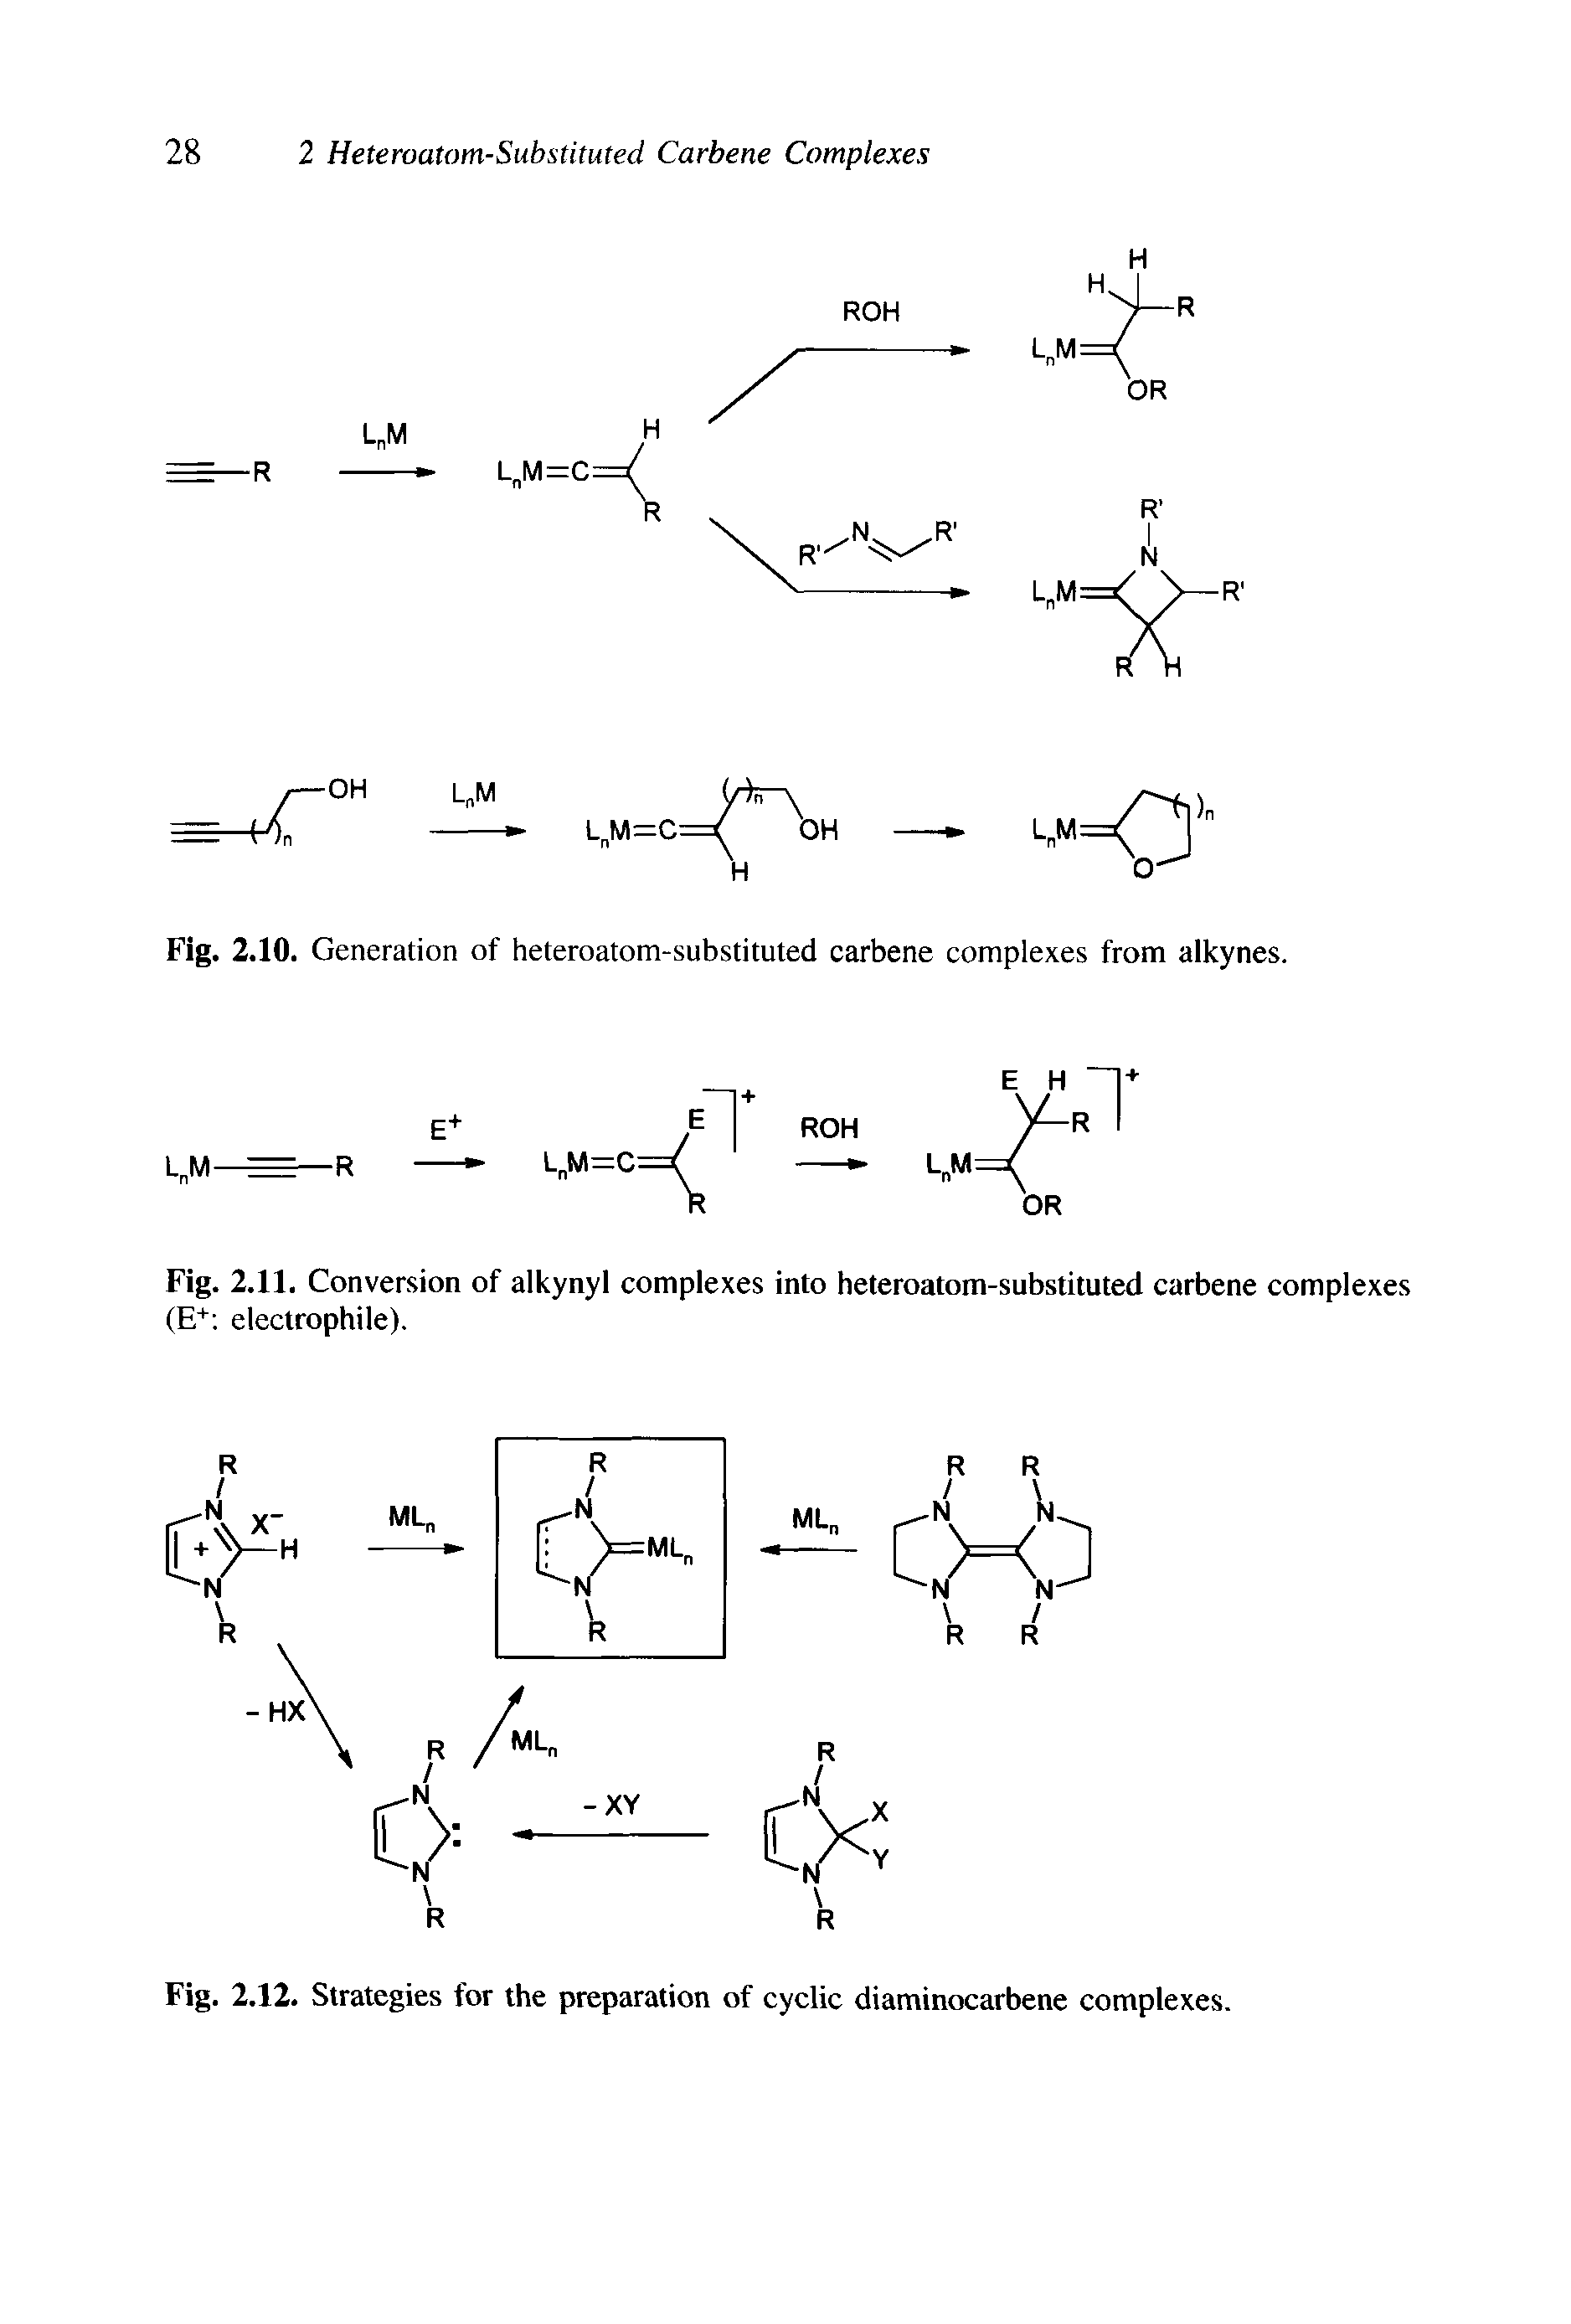 Fig. 2.11. Conversion of alkynyl complexes into heteroatom-substituted carbene complexes (E+ electrophile).